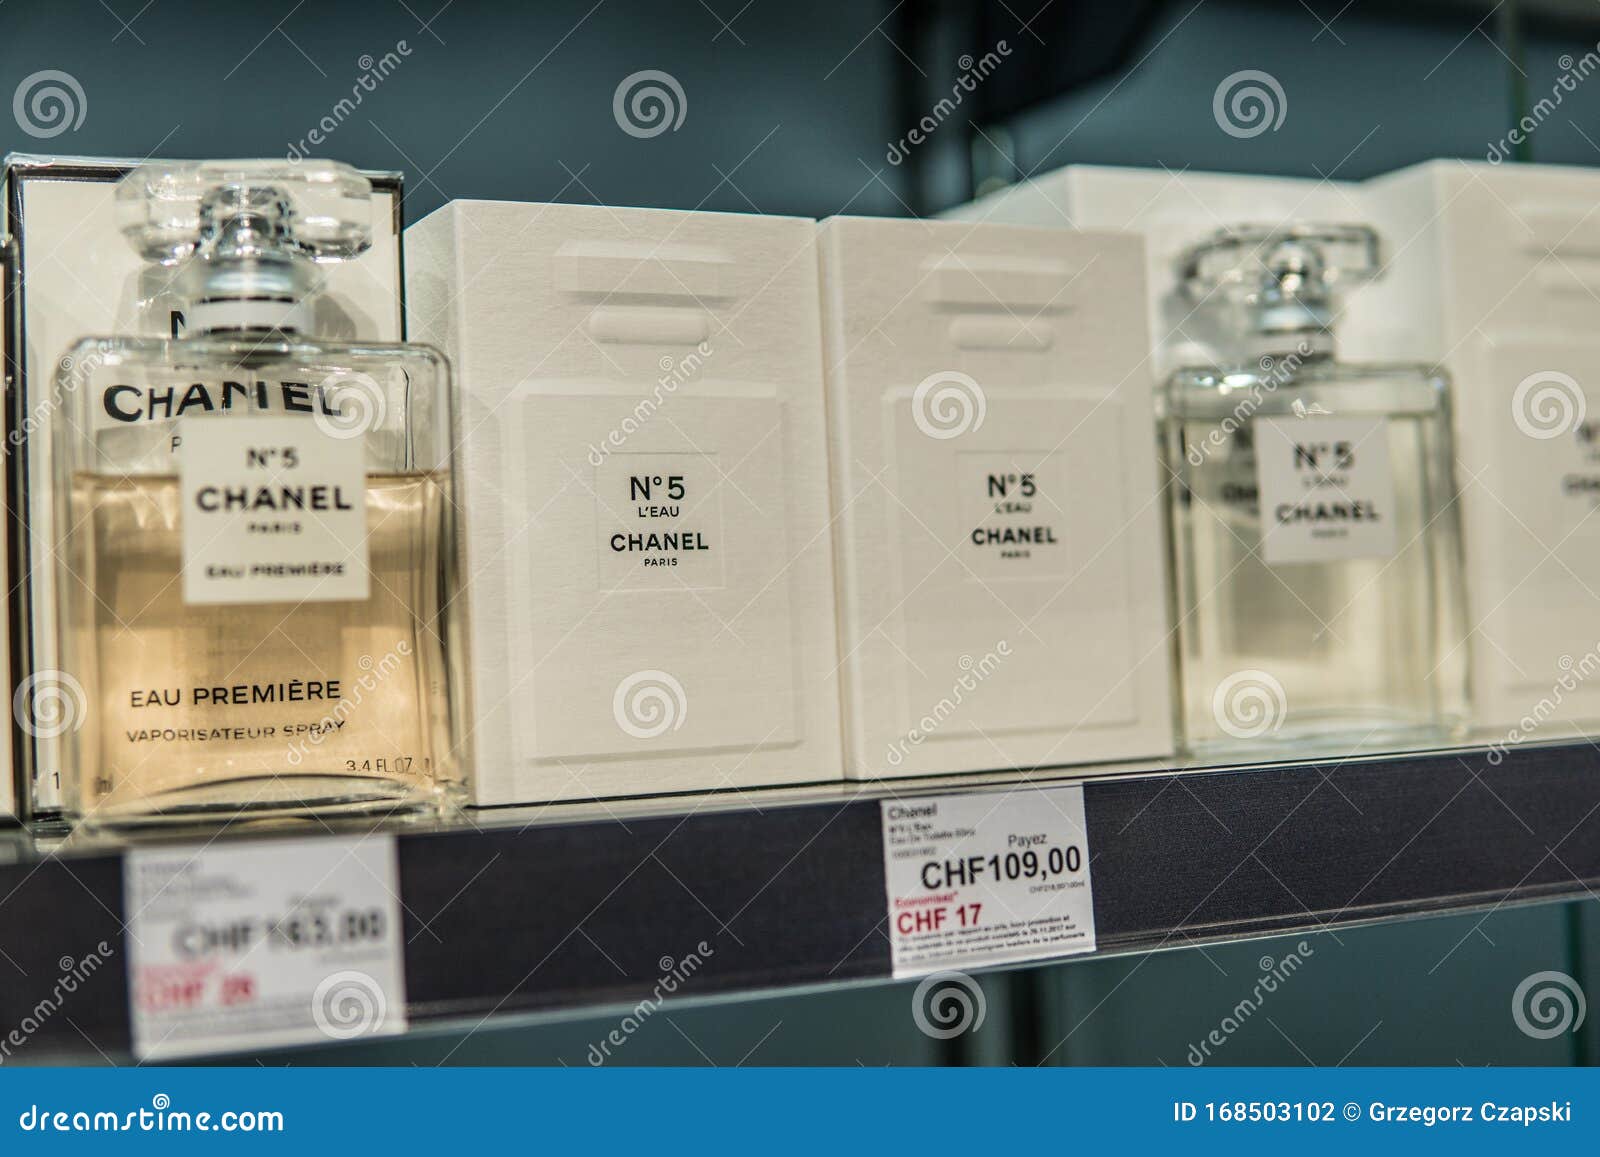 Chanel Paris No 5 Perfume on Shop Display Chanel No Editorial Image   Image of exposition care 175666585